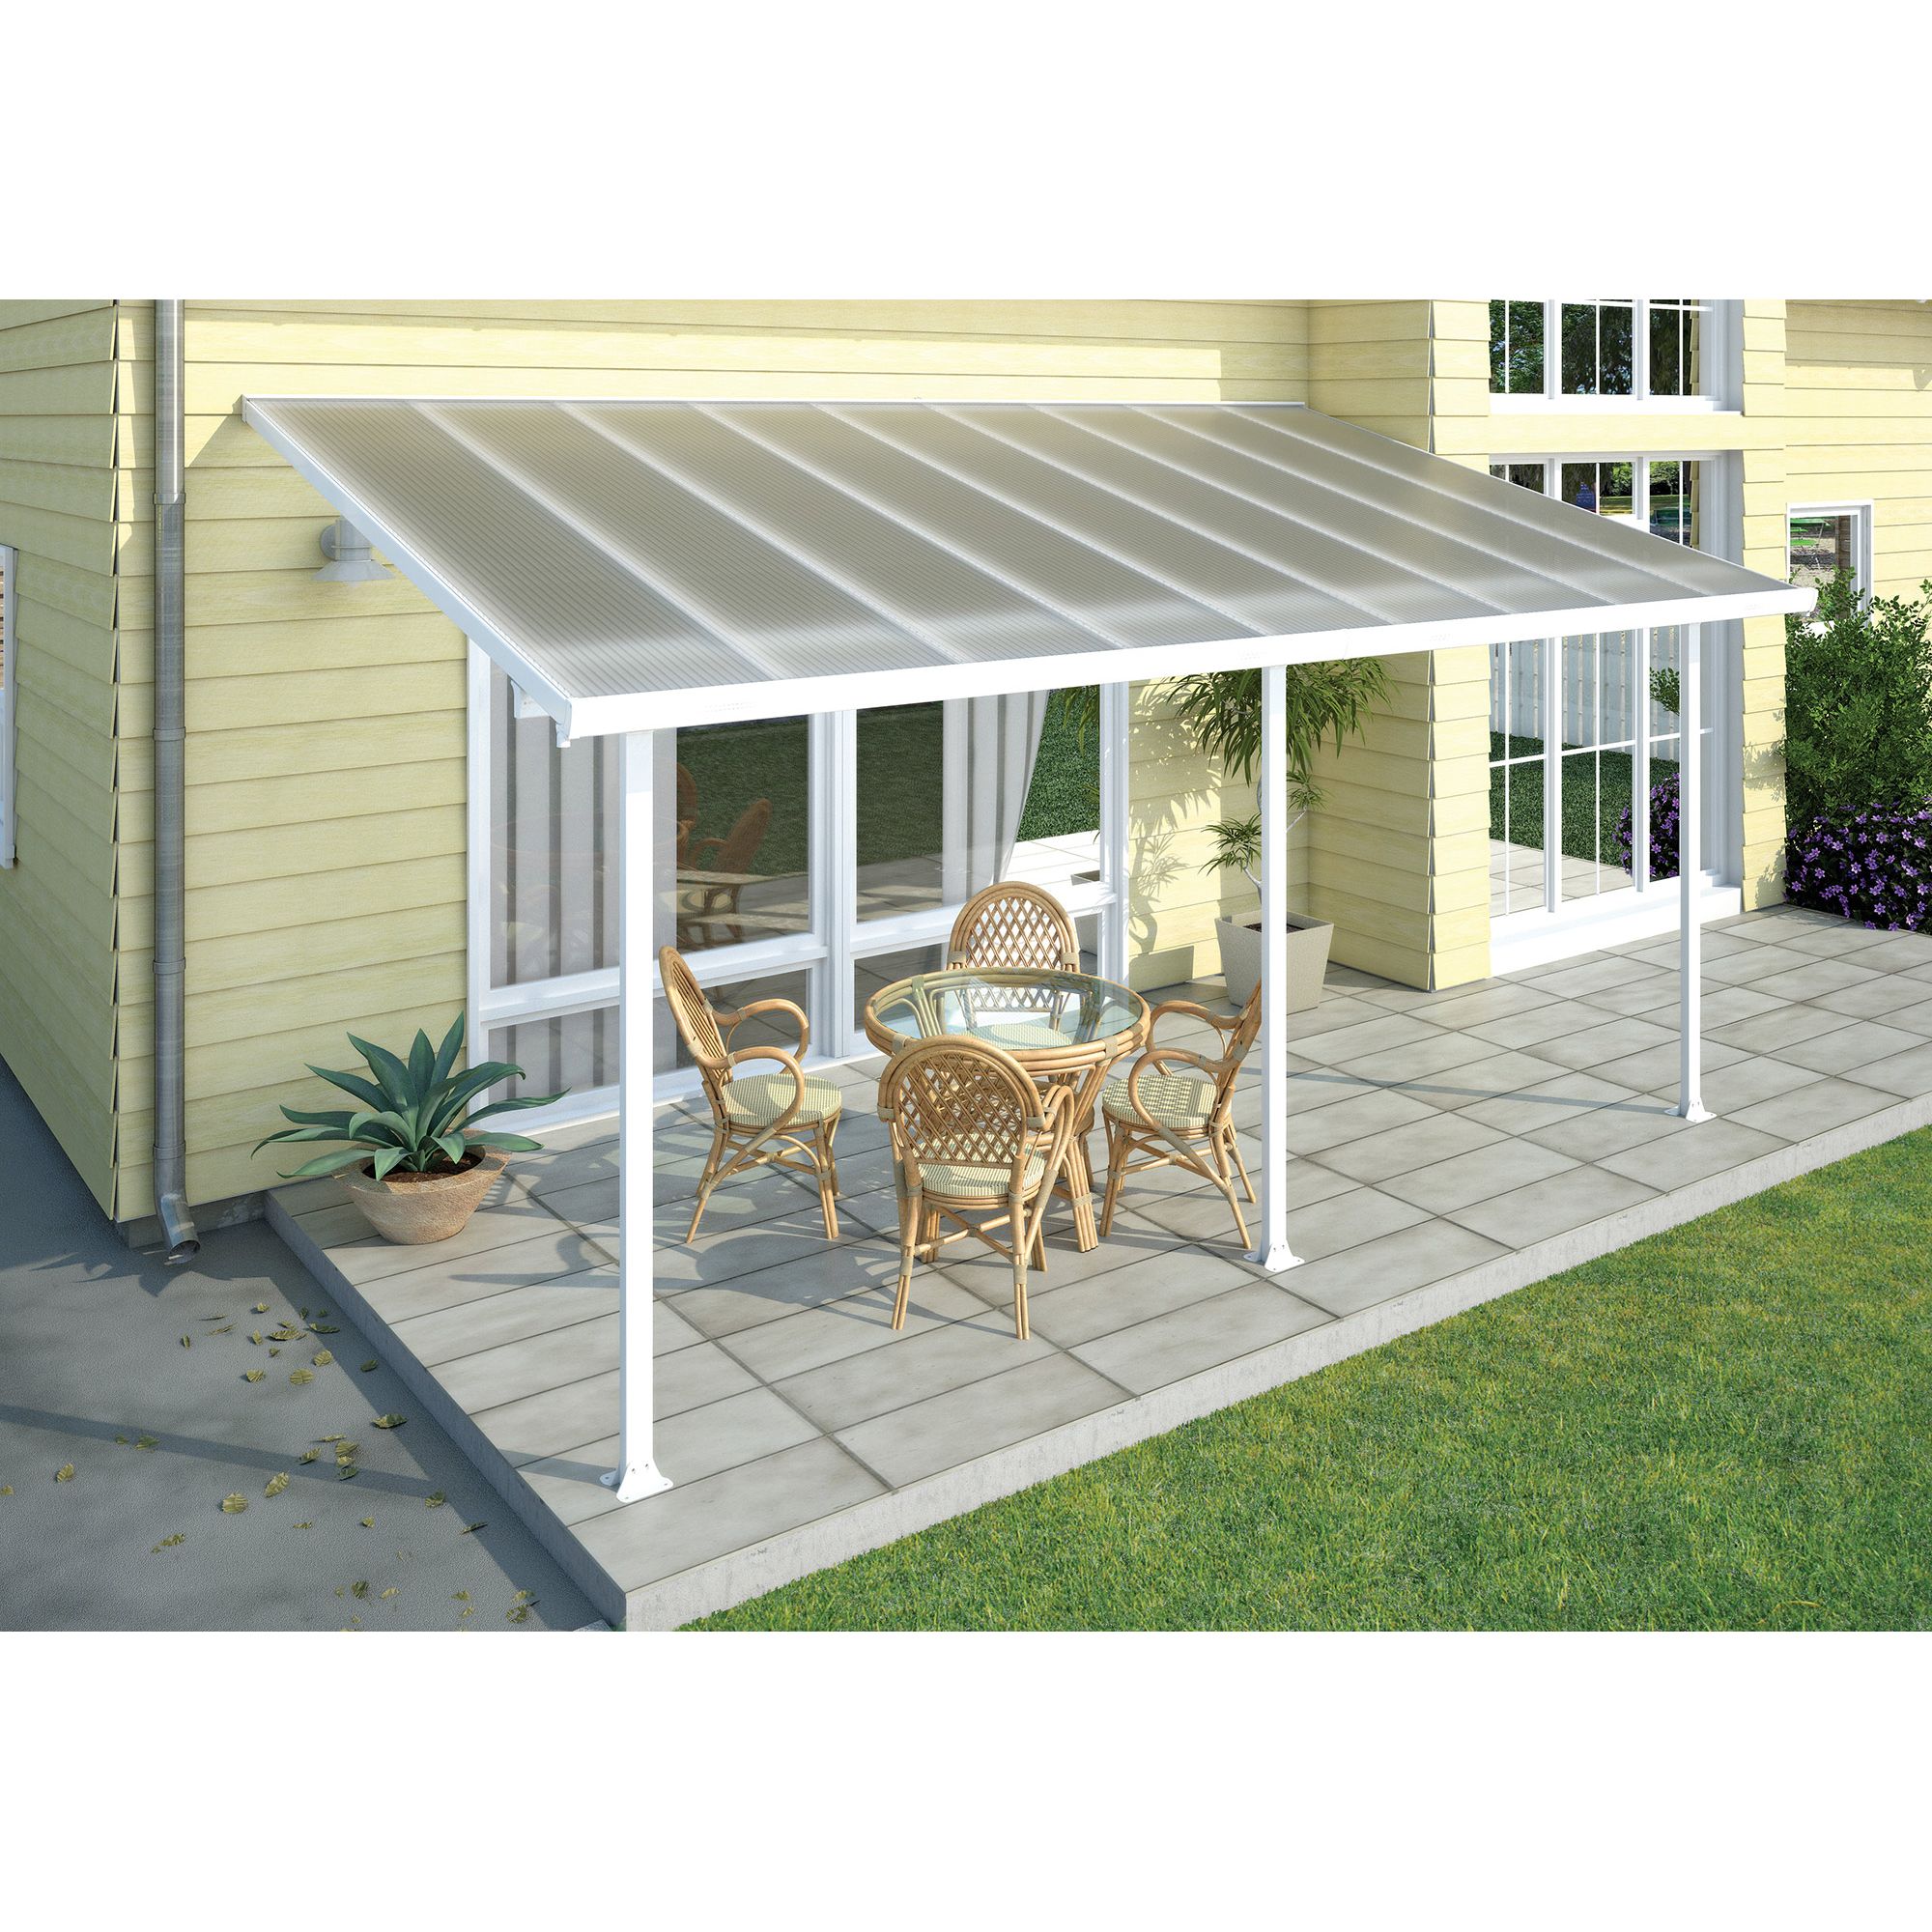 FERIA LEAN TO CARPORT AND PATIO COVER 3X10.35 WHITE at Tesco Direct